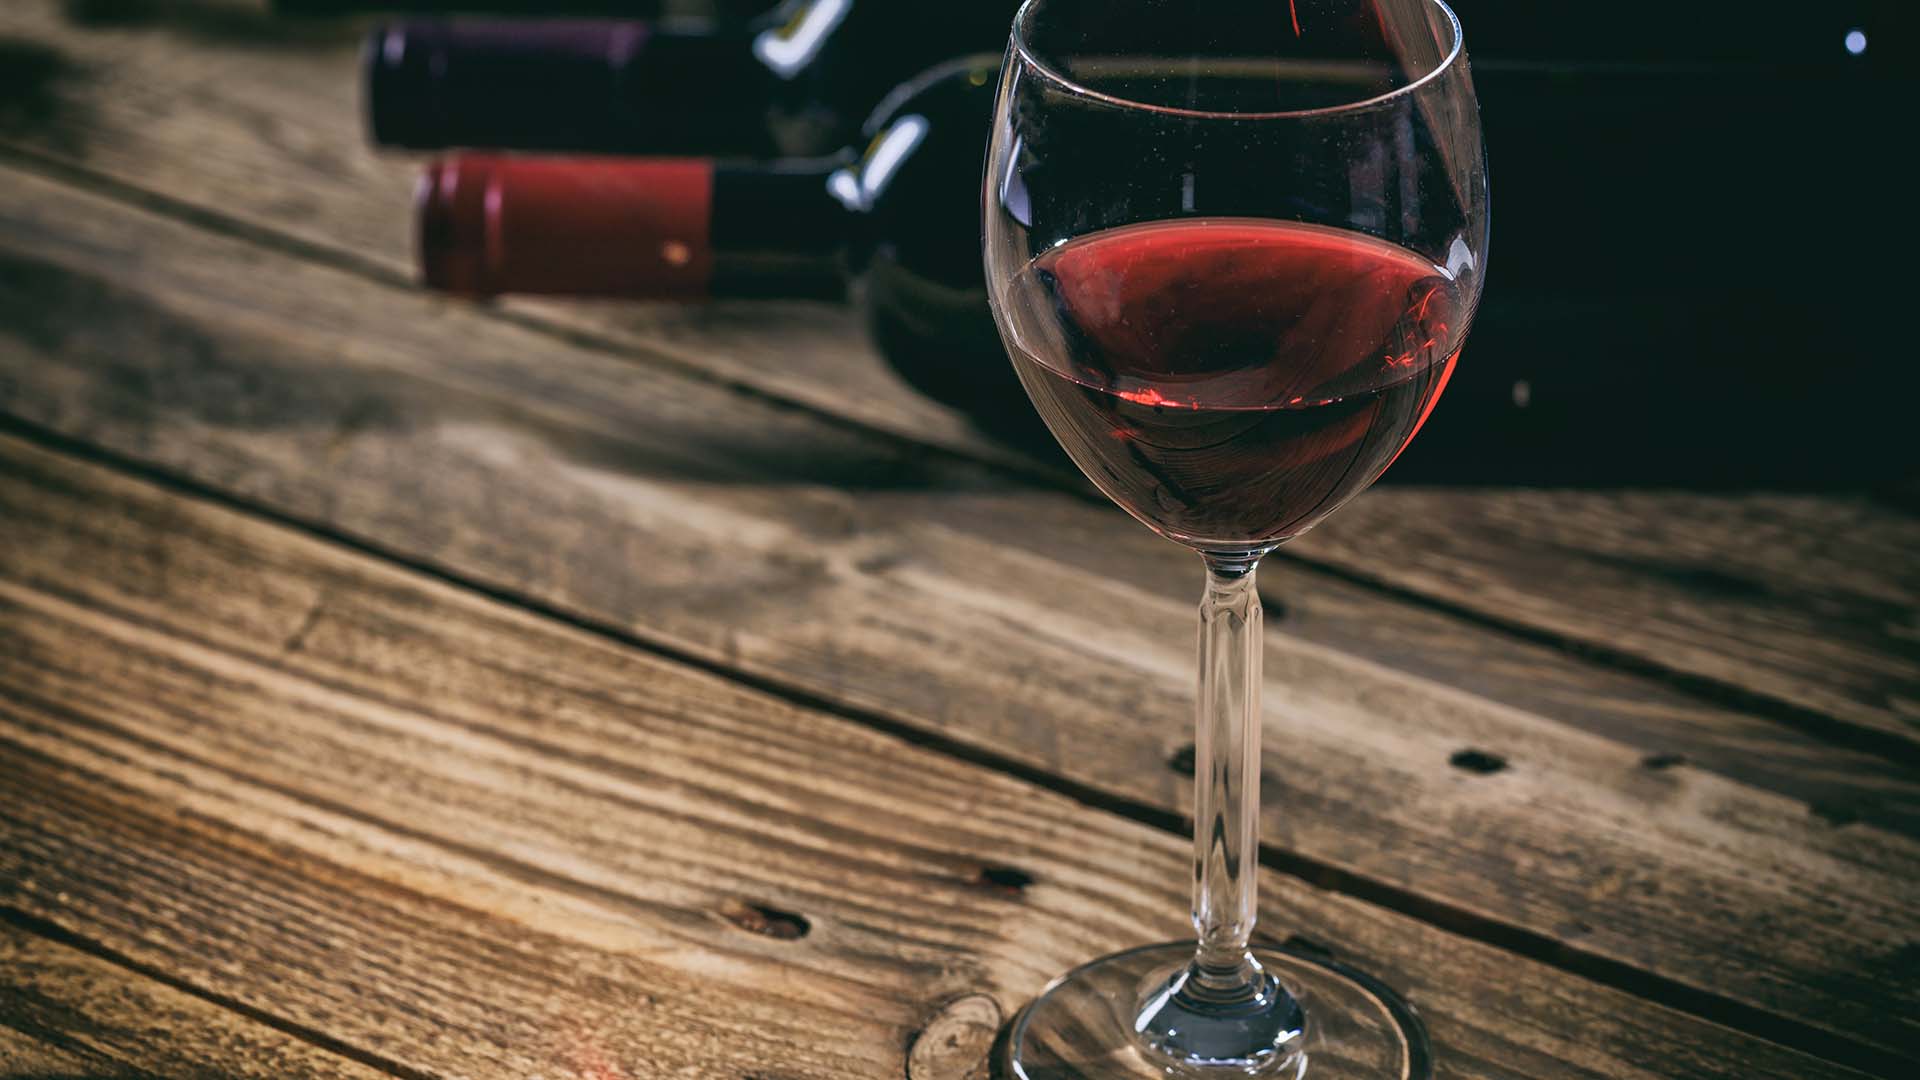 https://www.stepstorecovery.com/wp-content/uploads/2020/11/red-wine-glass-on-wooden-background-PPZ39UP.jpg